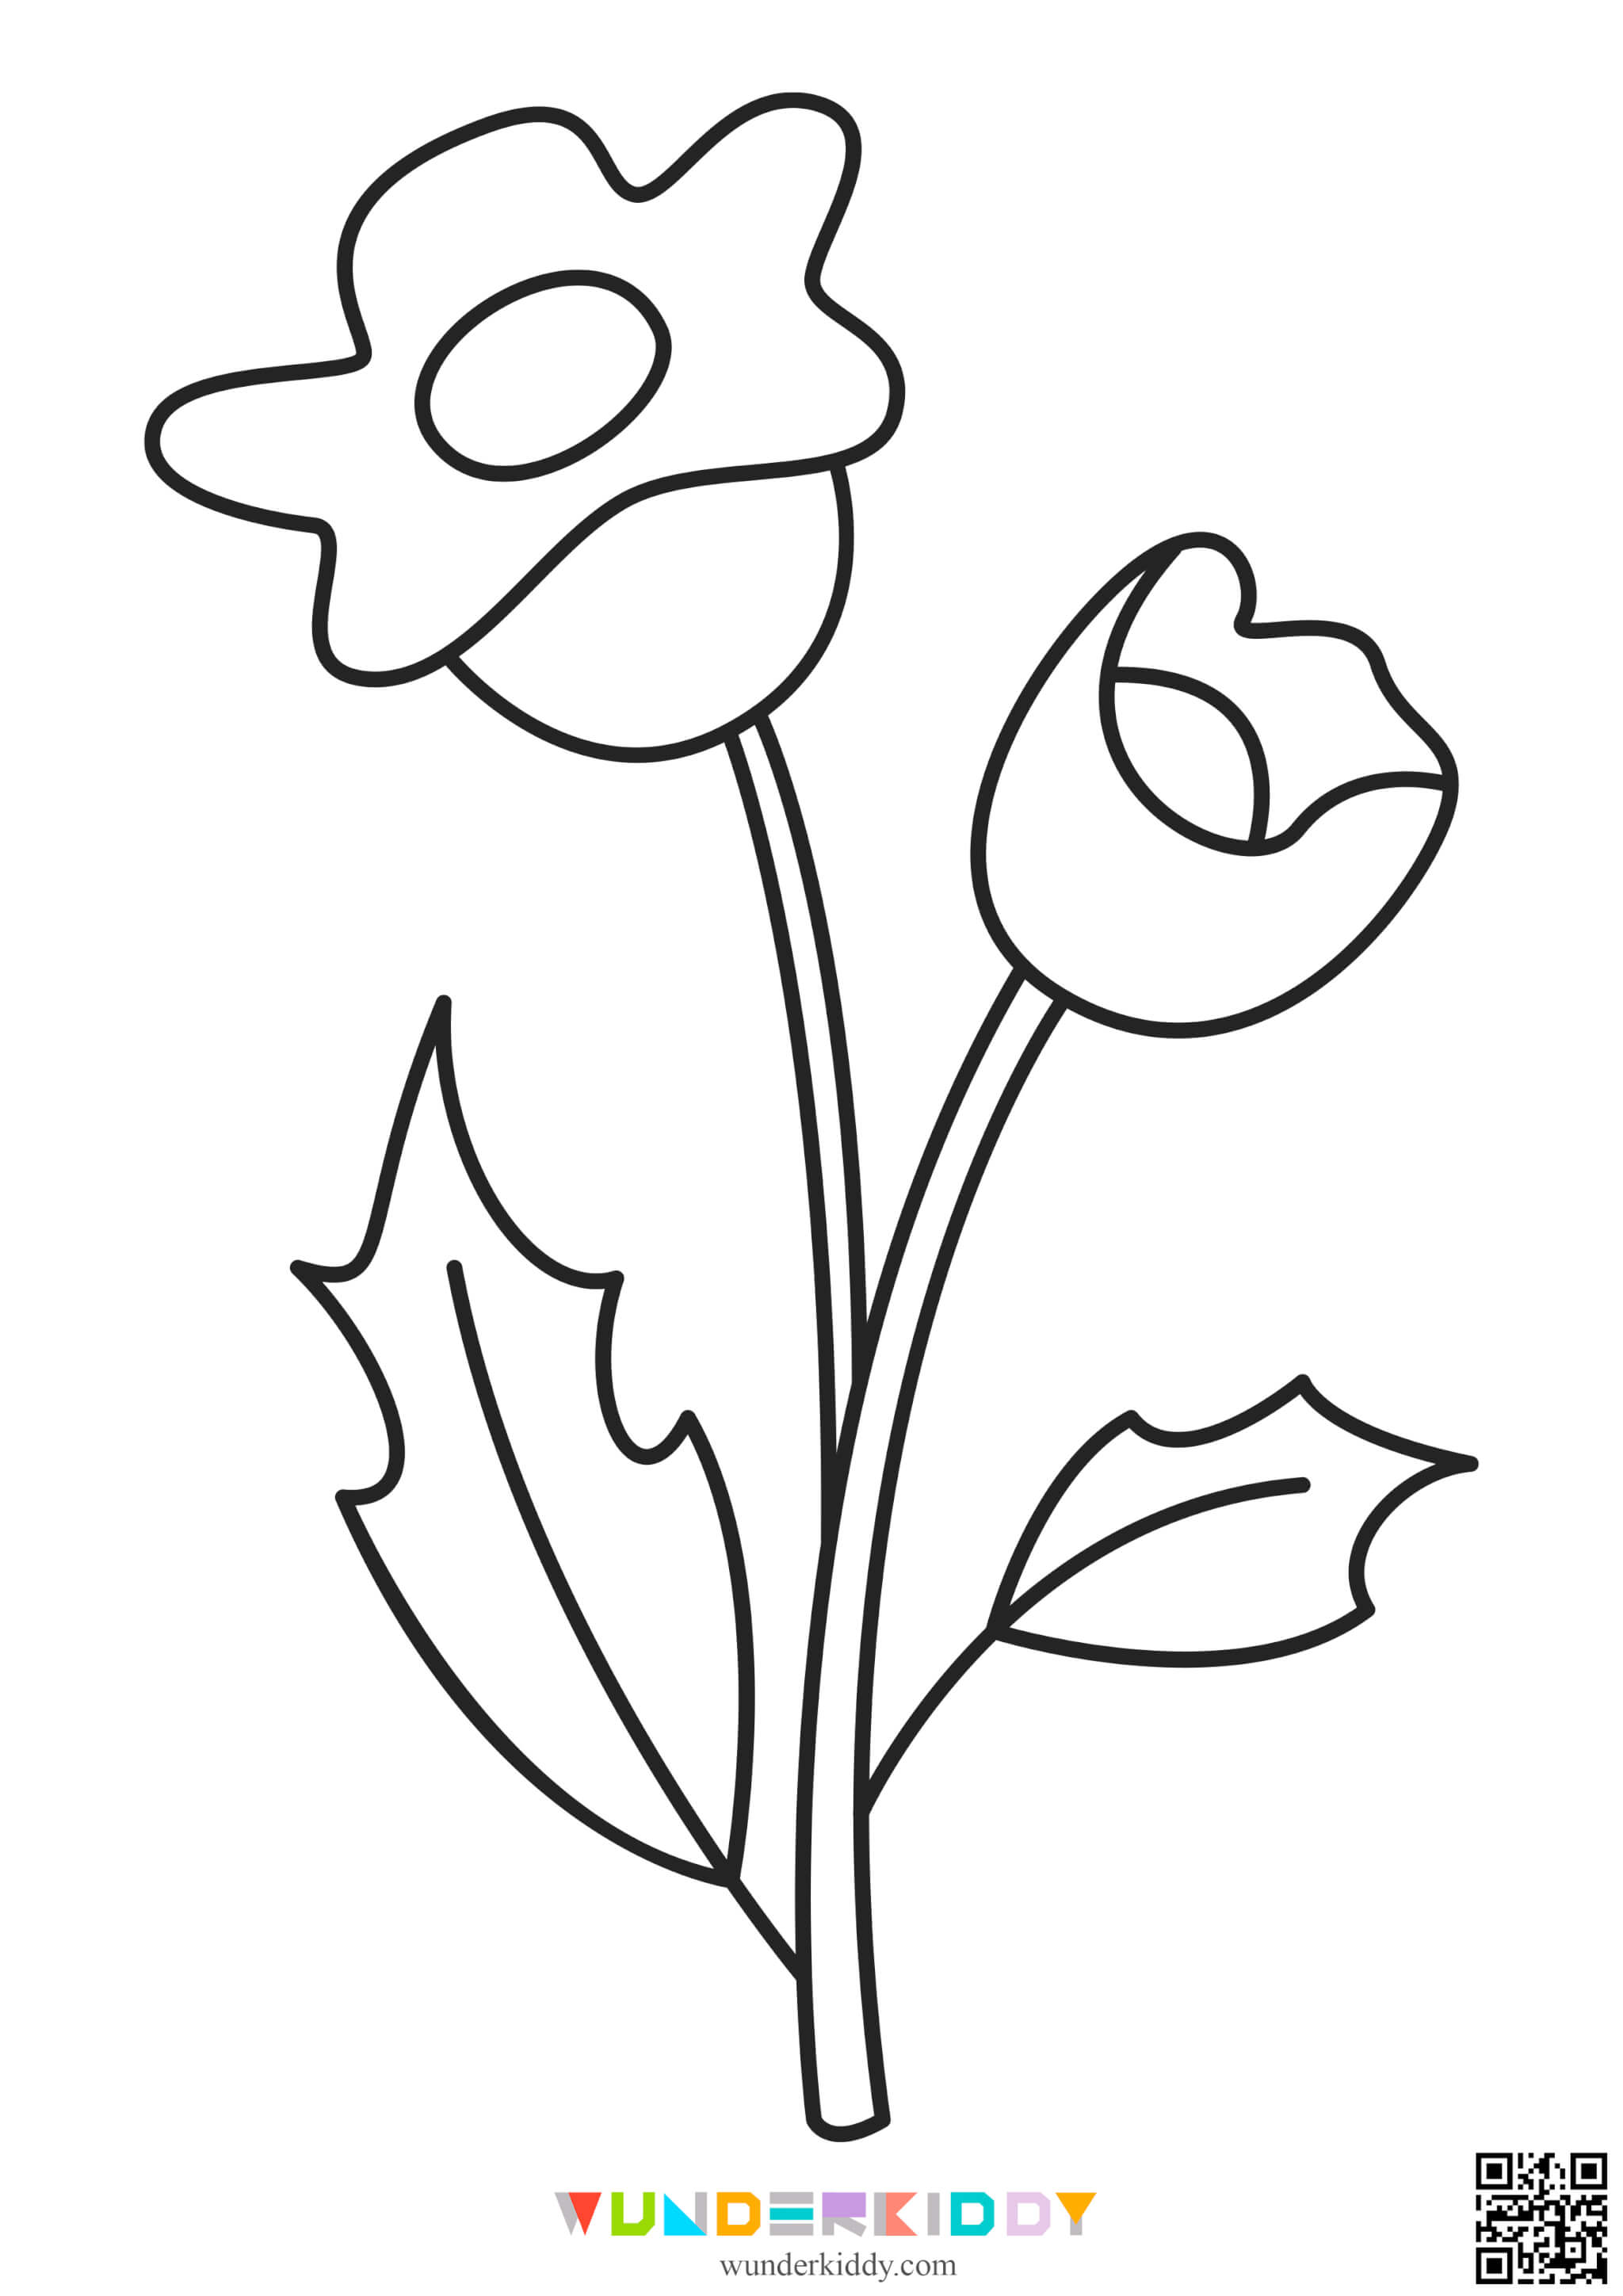 Flower Printable Coloring Pages - Image 16